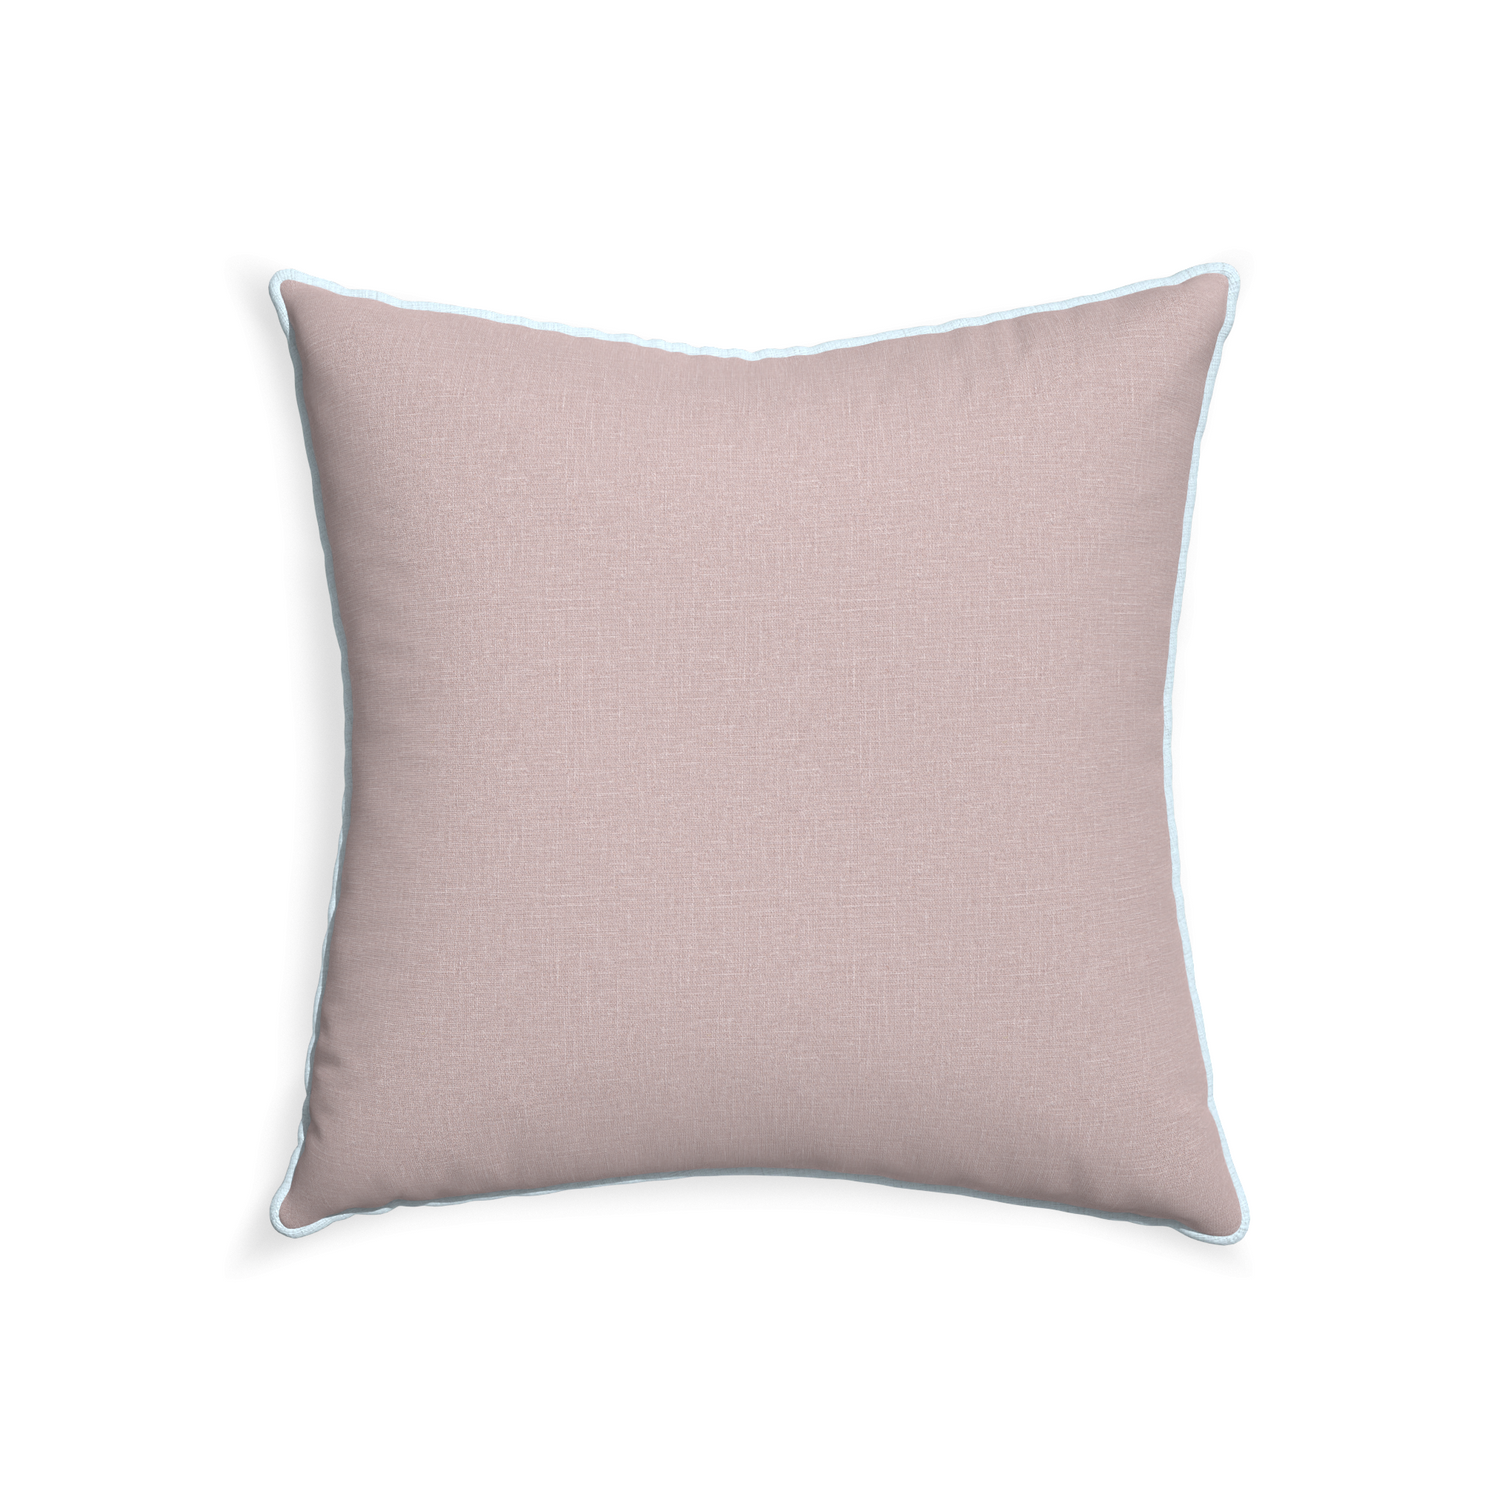 22-square orchid custom mauve pinkpillow with powder piping on white background